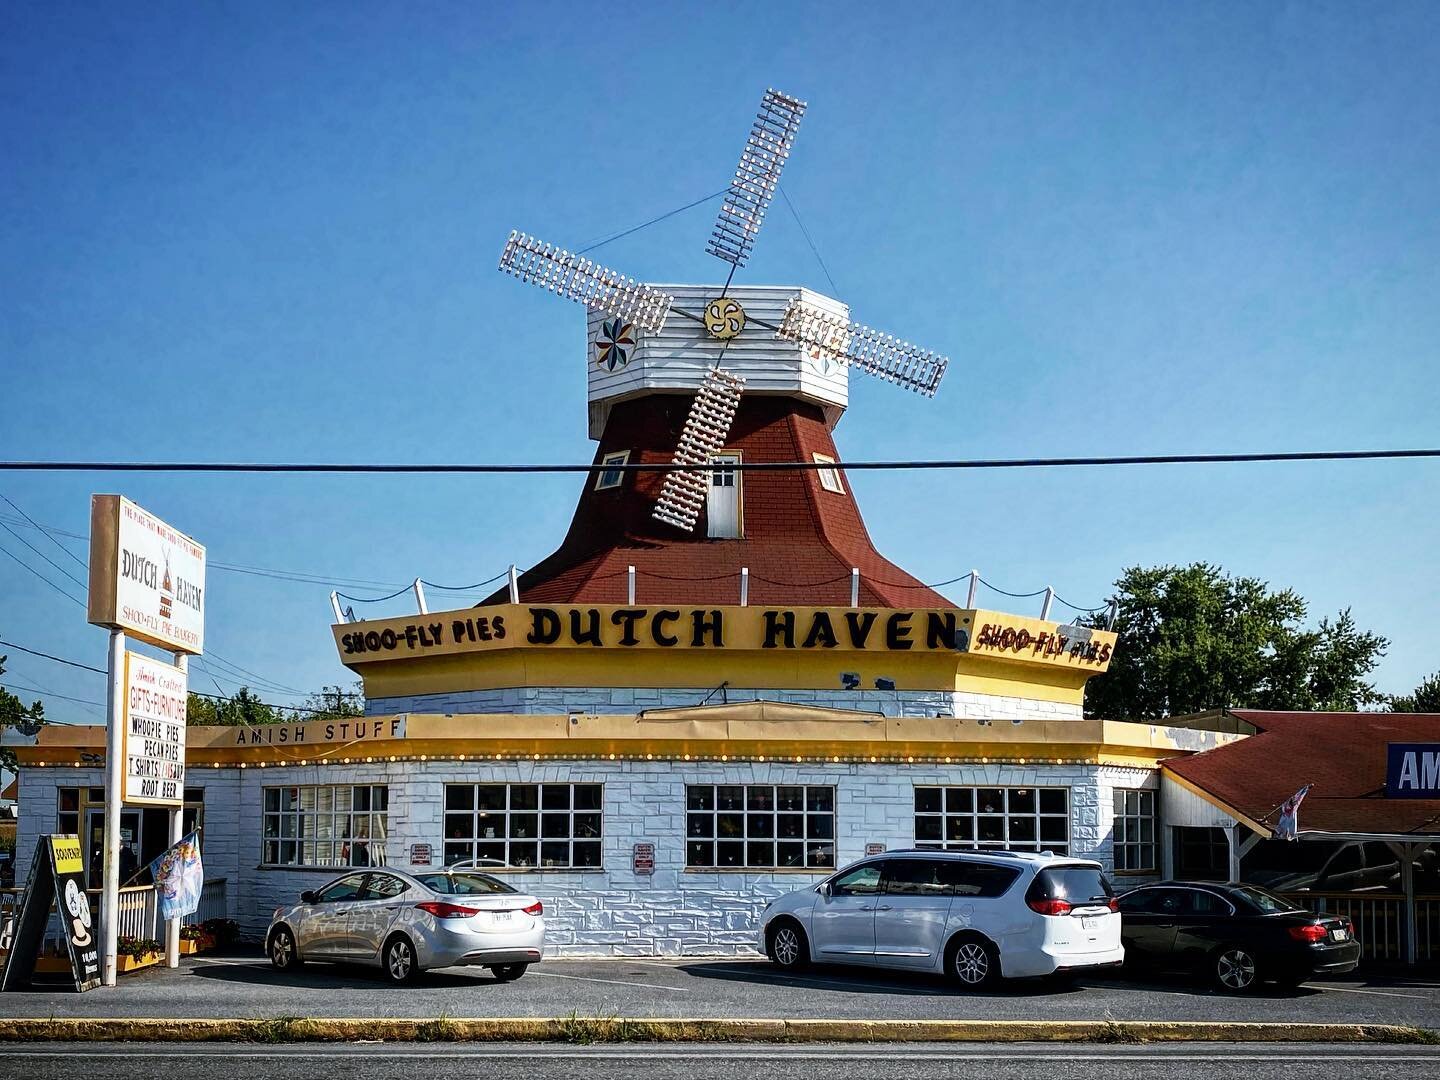 Dutch Haven has been a favorite Lancaster County tourist attraction for decades. In the Pennsylvania Dutch section of the Lincoln Highway since the 1920&rsquo;s, it started as a restaurant which sold local Amish foods, including their famous shop-fly